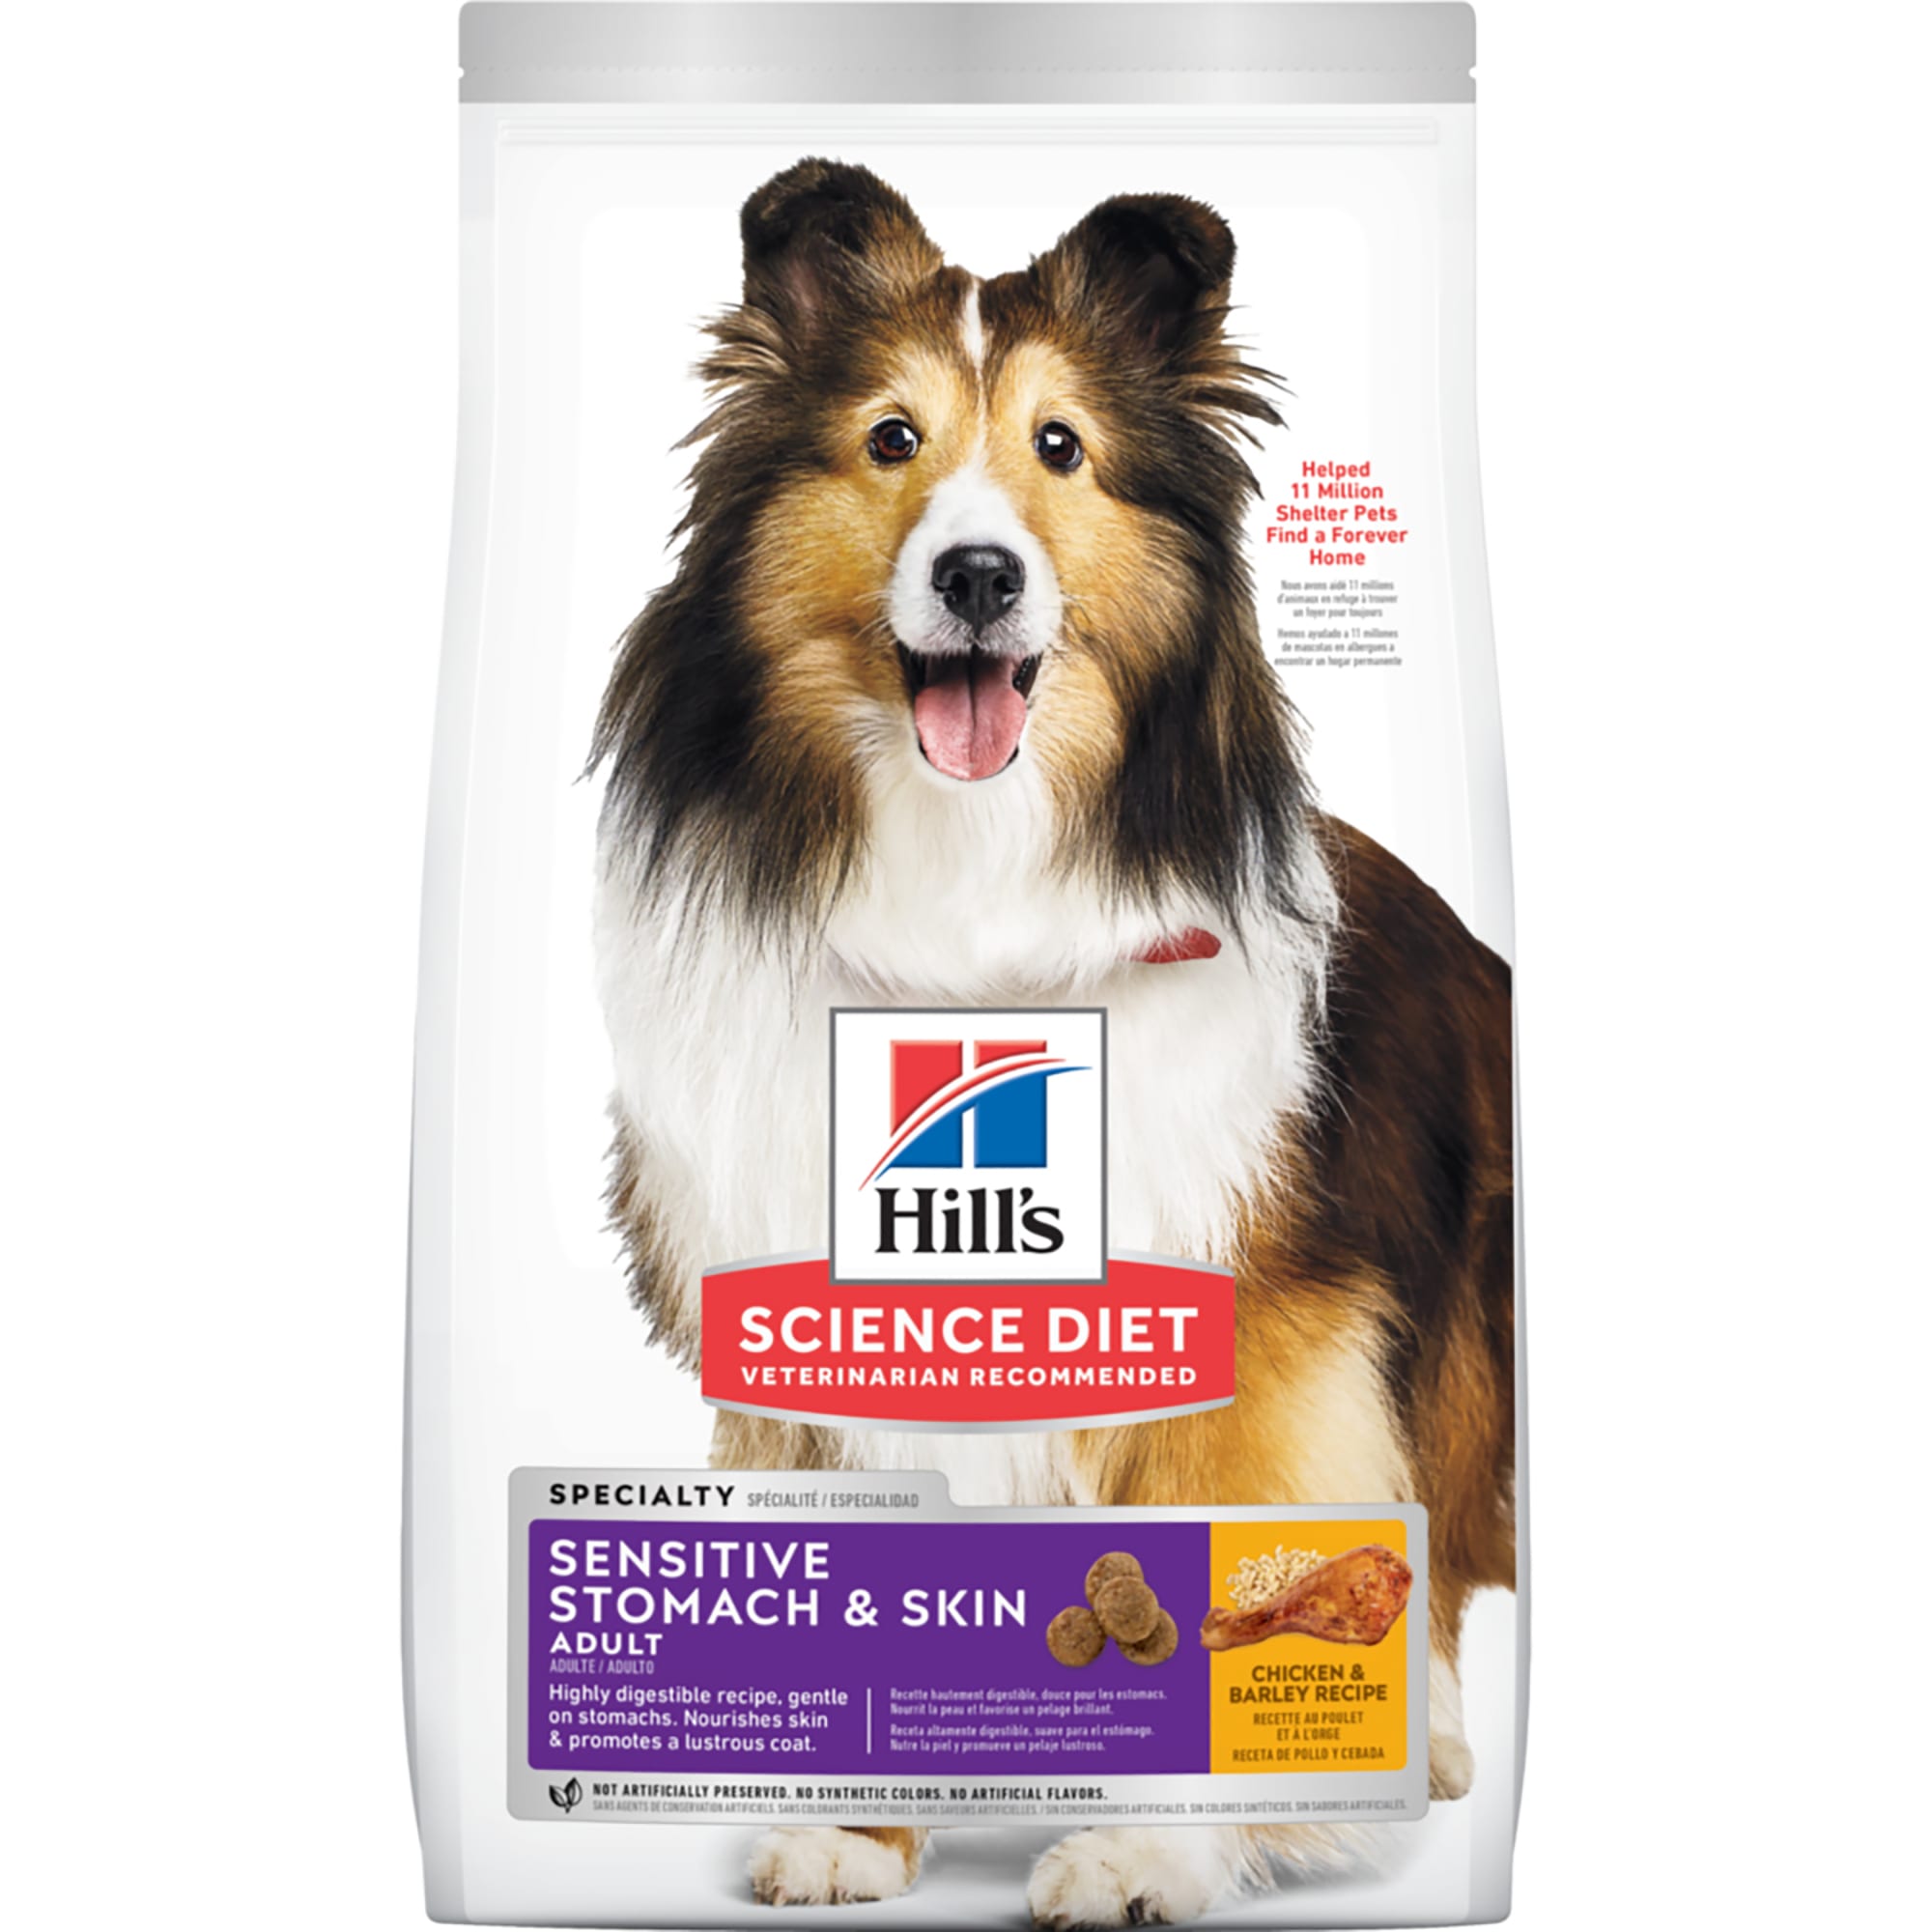 Photos - Dog Food Hills Hill's Hill's Science Diet - Dry  for Sensitive Stomach & Skin, Hi 